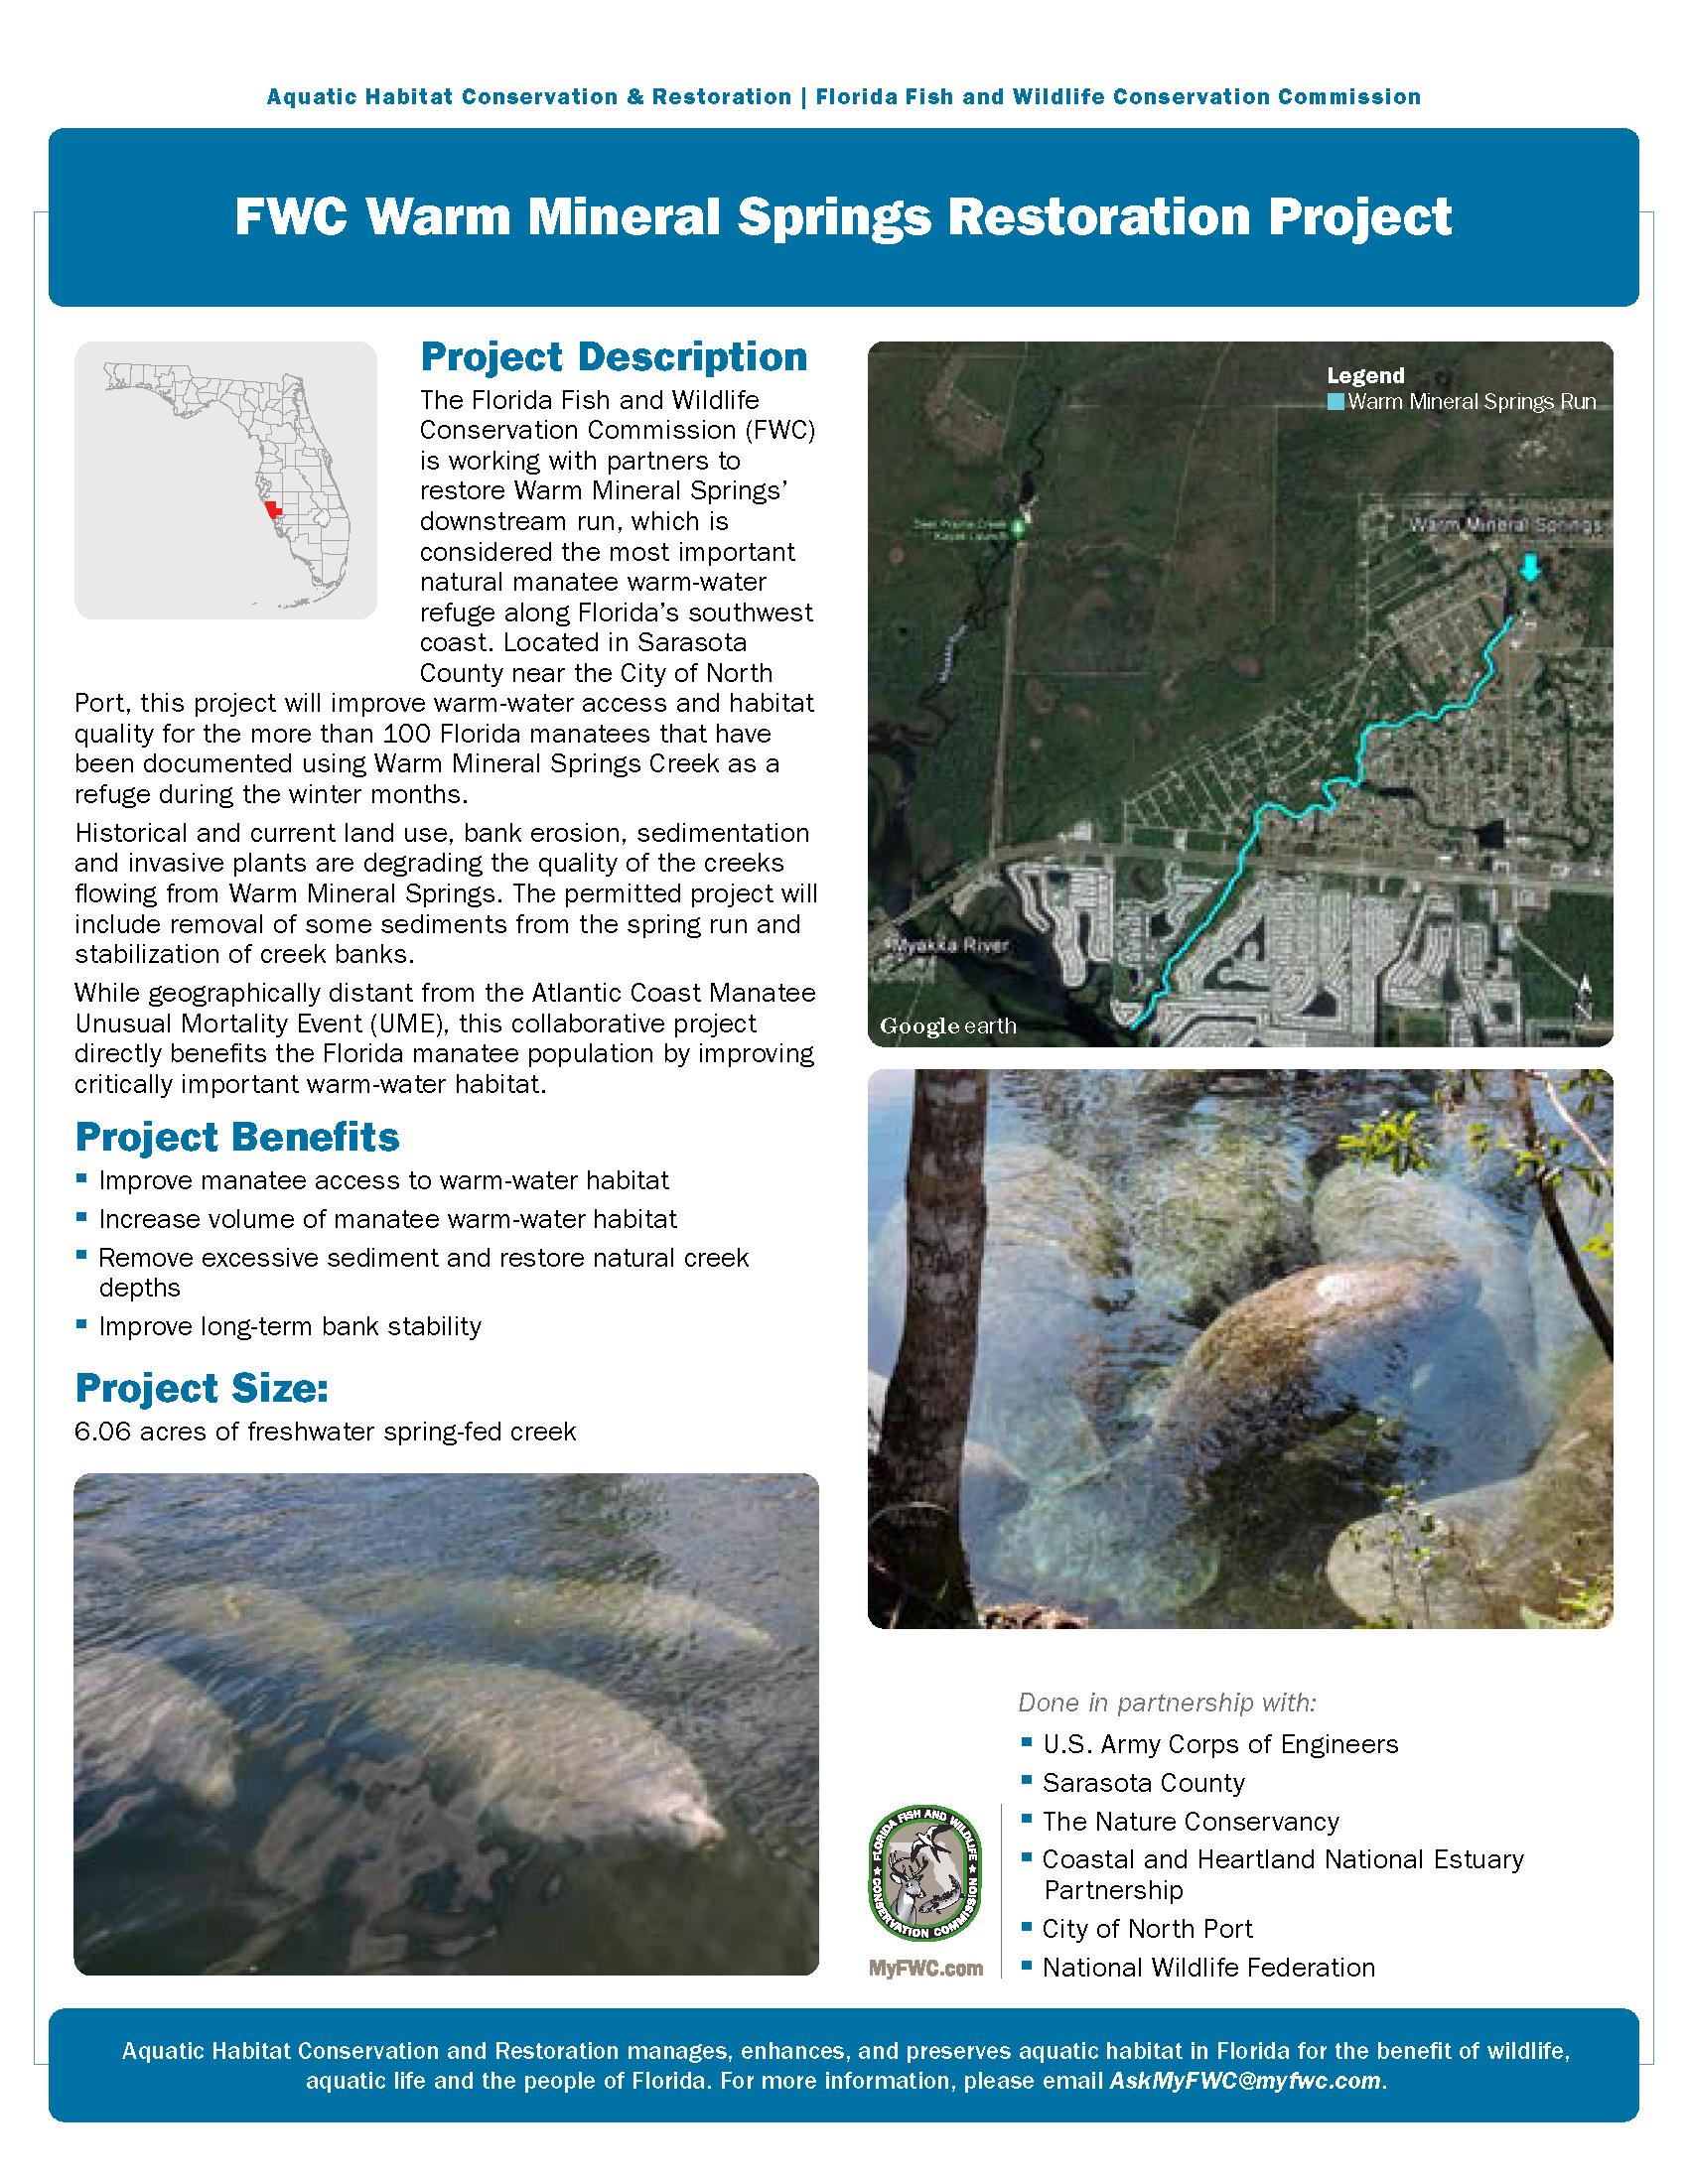 Warm Mineral Springs Restoration Project